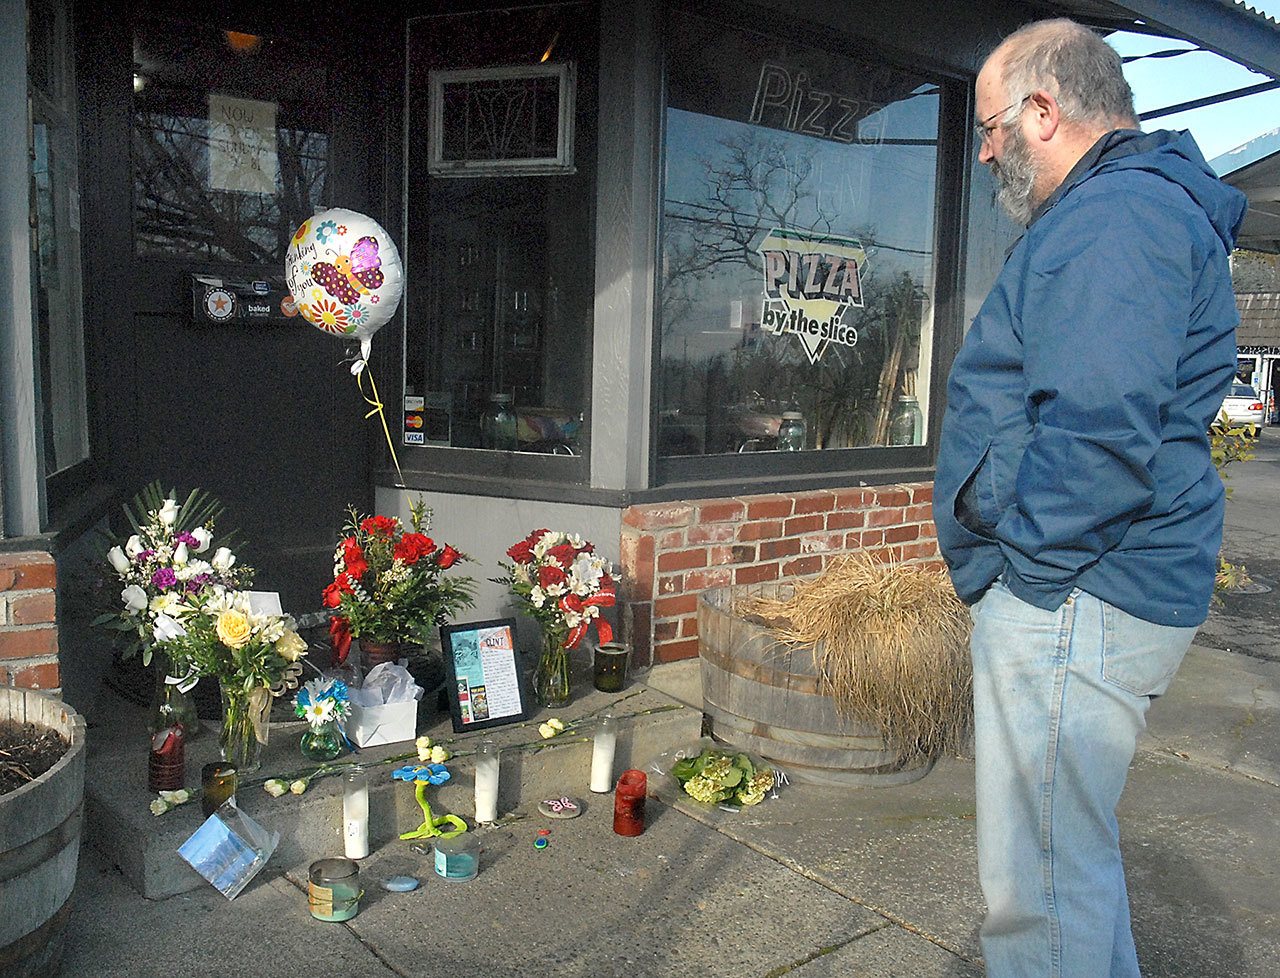 Pete Rennie of Port Angeles, a former patron of Van Goes Gourmet Pizza & Mexican, pays his respects at a make-shift shrine to restaurant-owner Clint Darrow at the front door of the Port Angeles business on Saturday. (Keith Thorpe/Peninsula Daily News)